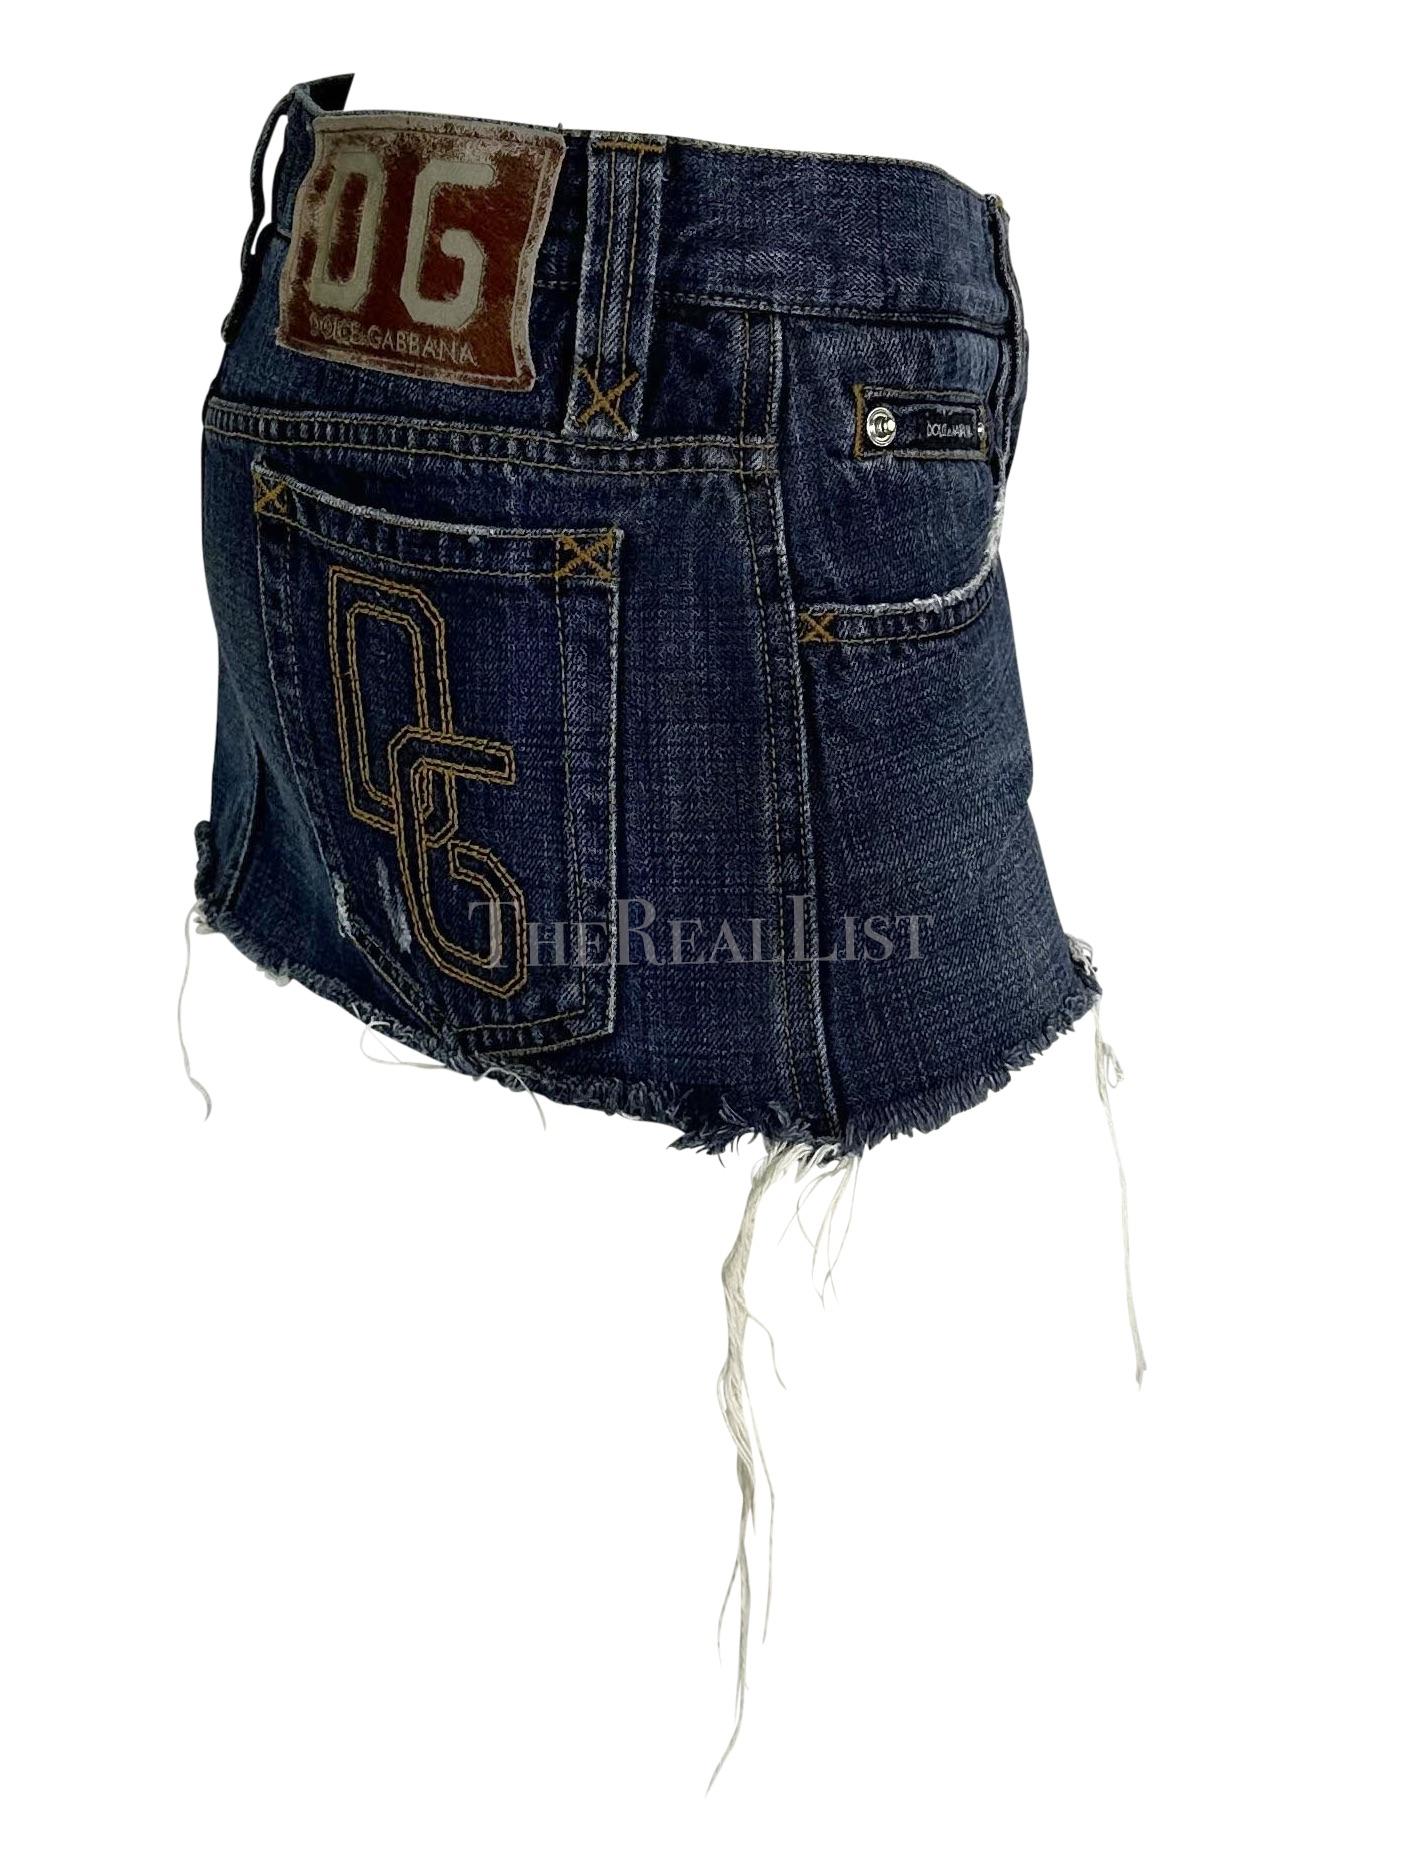 Presenting a hot denim Dolce and Gabbana super mini jean skirt. From the early 2000s, this short skirt is constructed of denim and features a distressed hemline, 'DG' embroidered on the back pocket, and a pony hair jacron. The perfect Y2K piece,